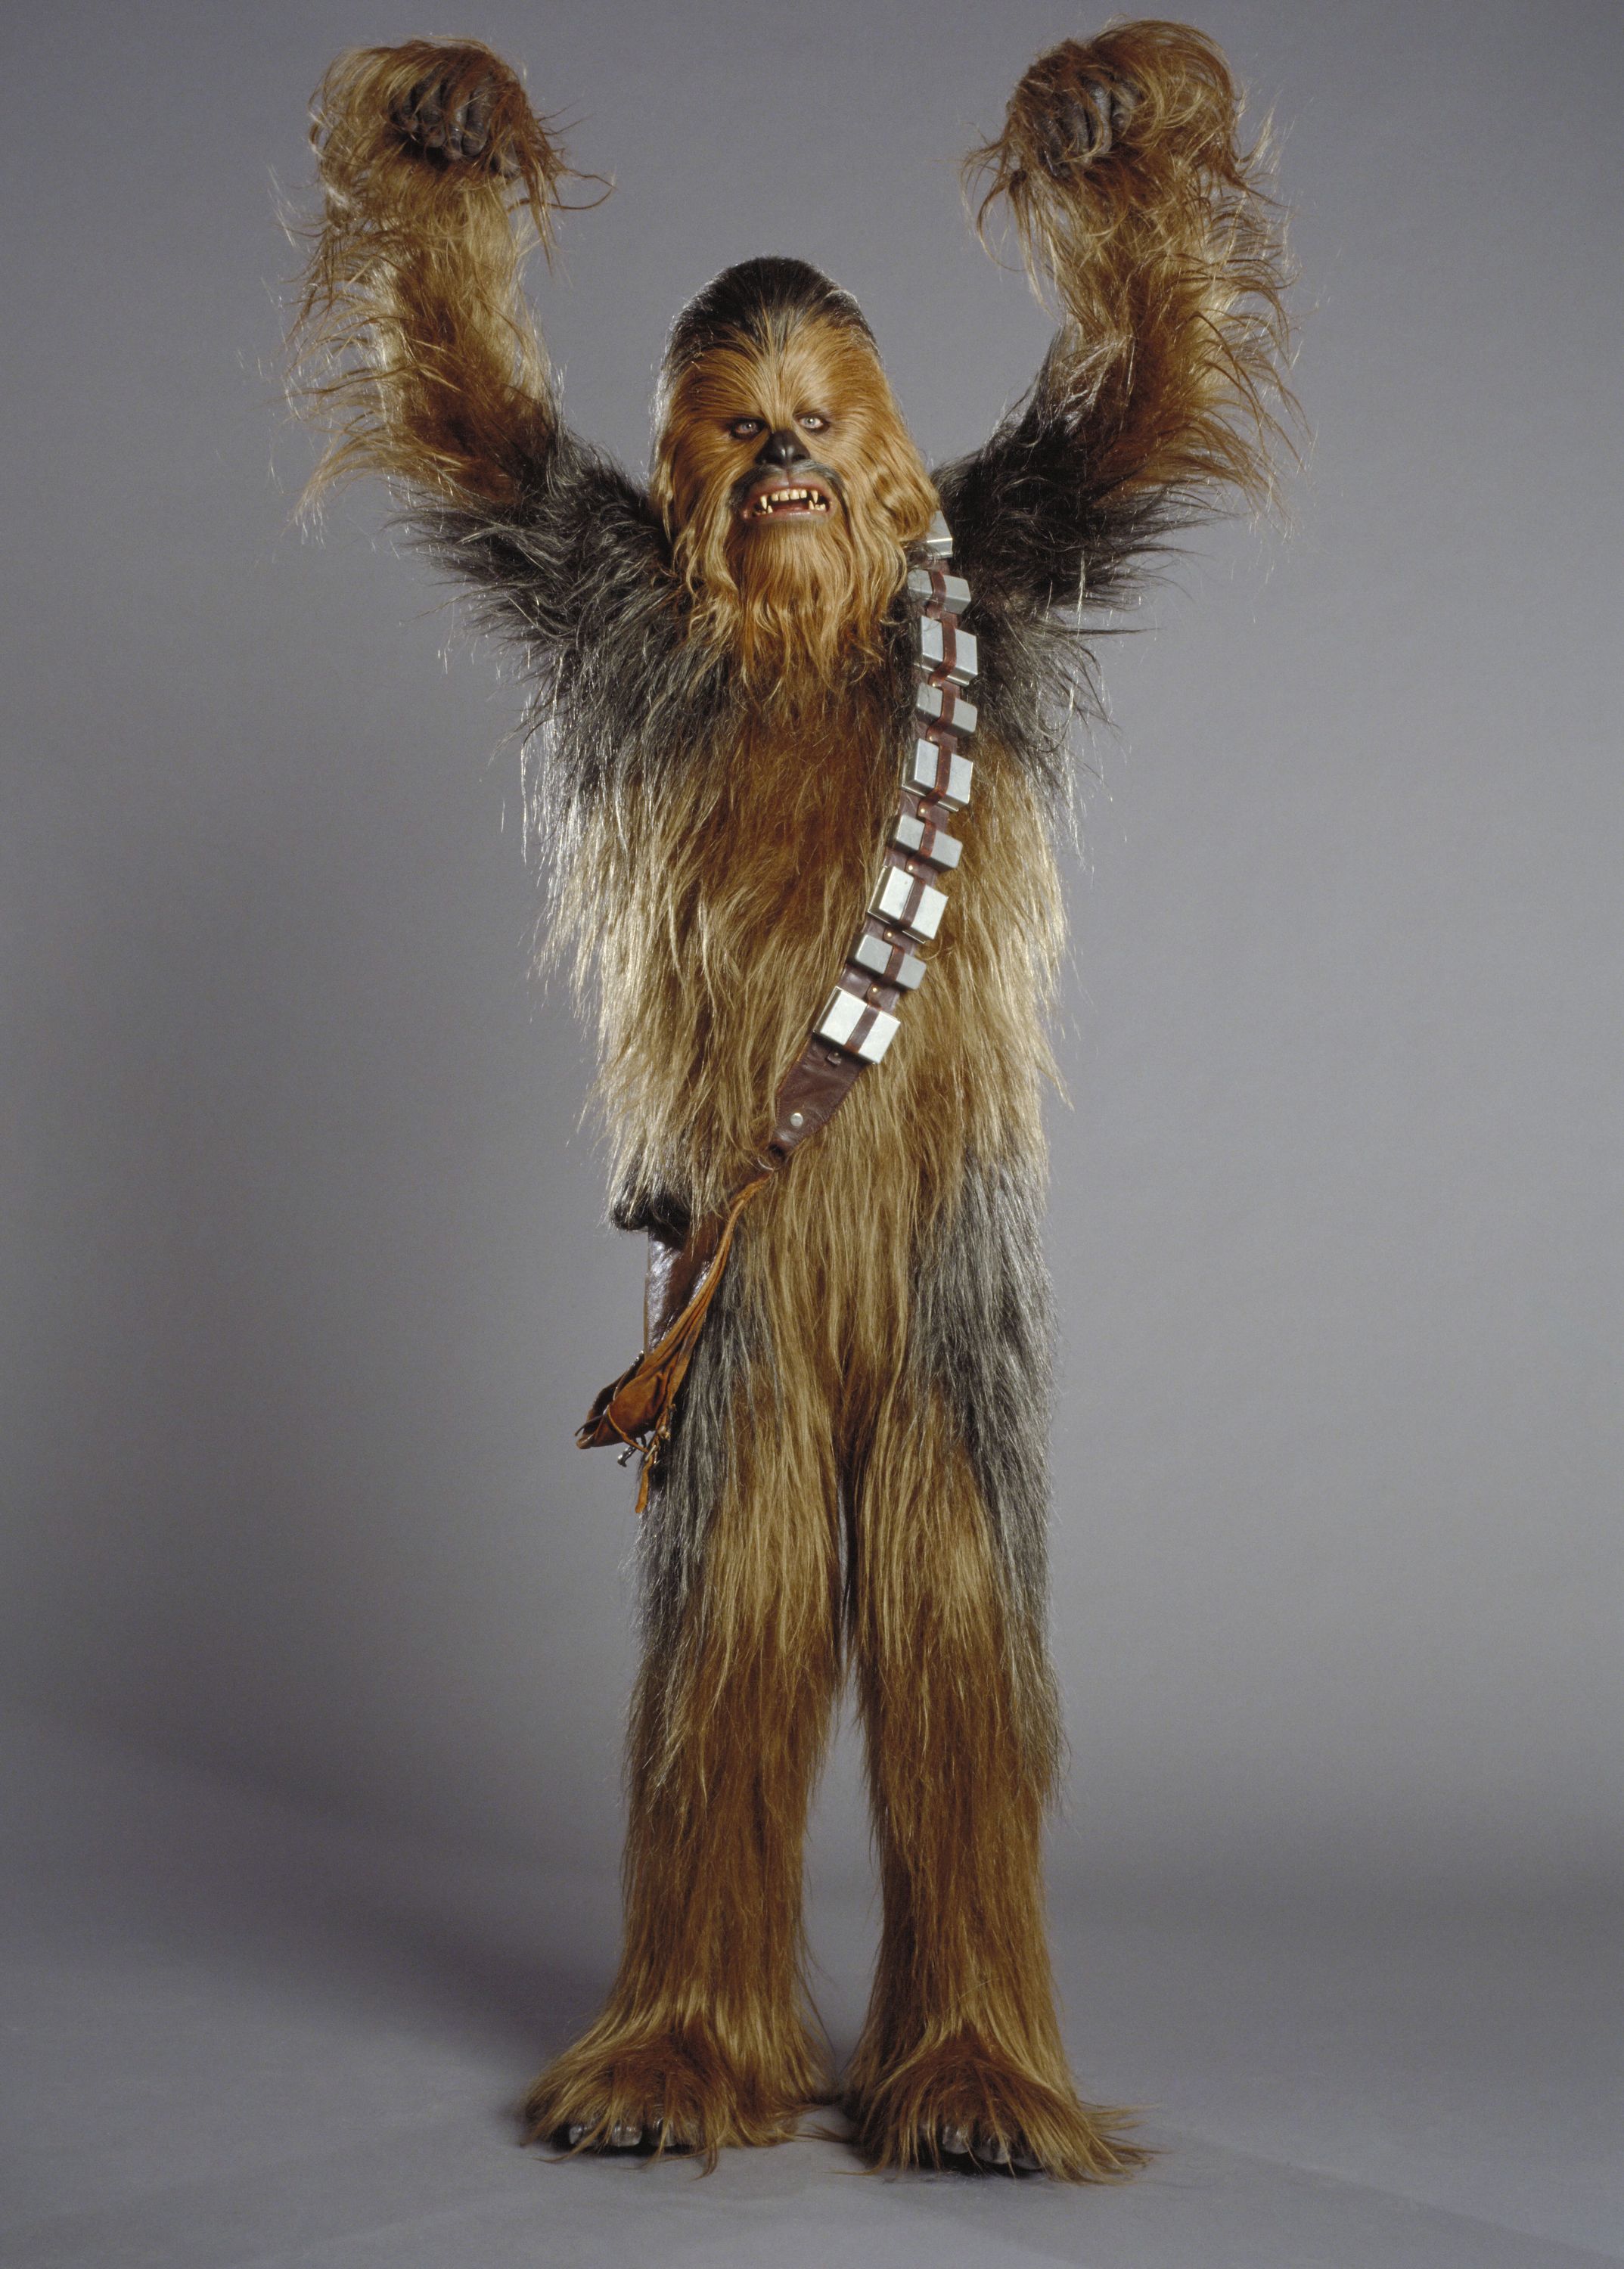 http://www.starwars-universe.com/images/multimedia/Images/Personnages/Chewbacca/hqchewie.jpg